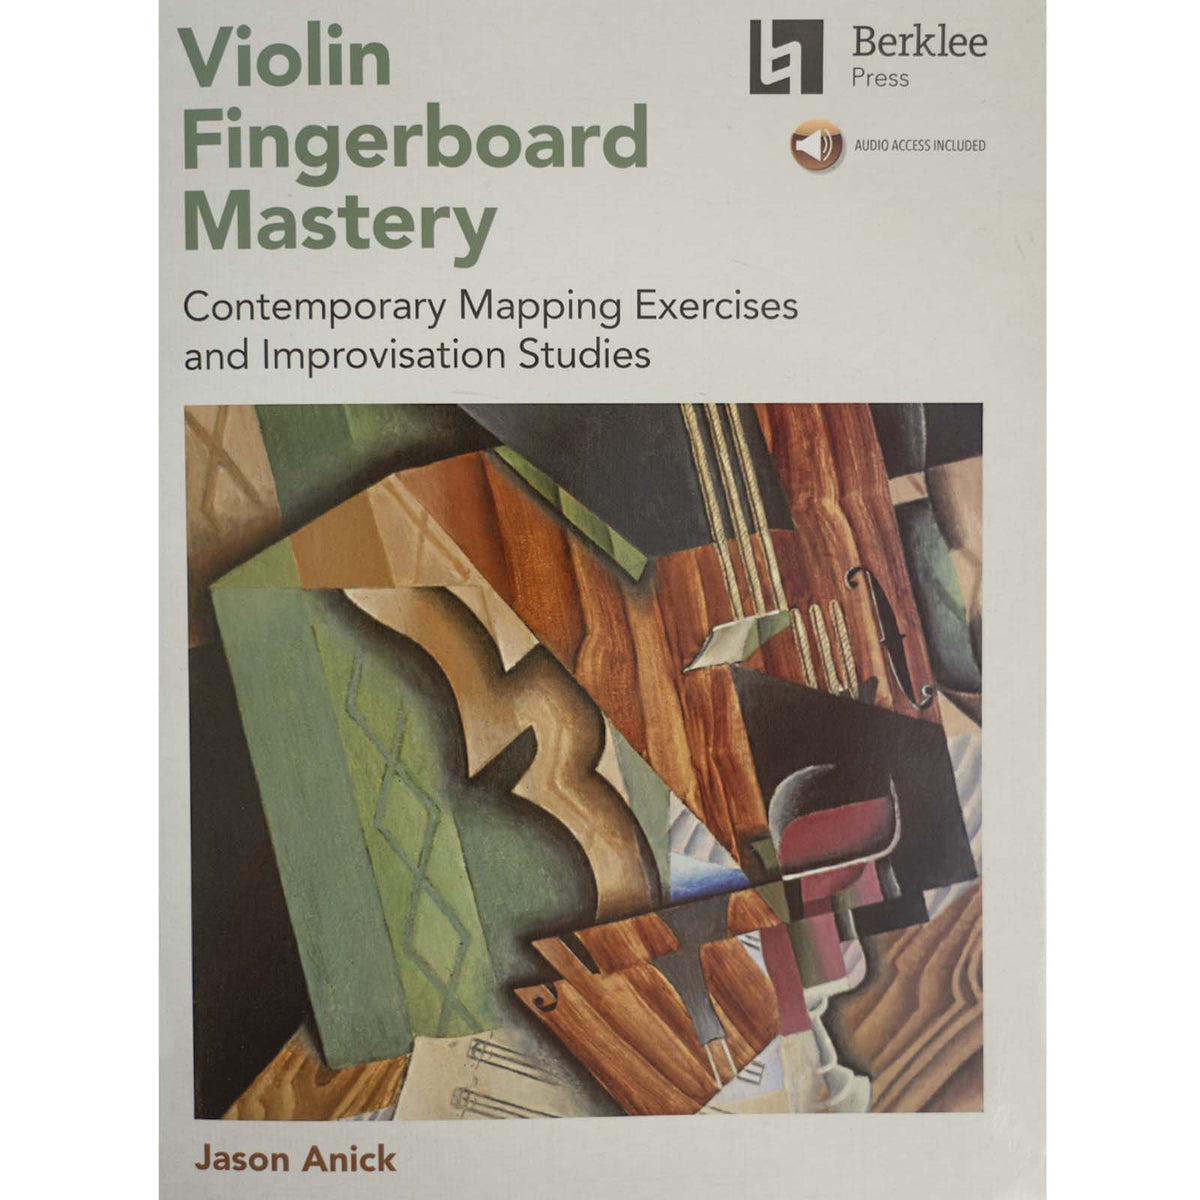 Violin Fingerboard Mastery: Contemporary Mapping Exercises And Improvisation Studies